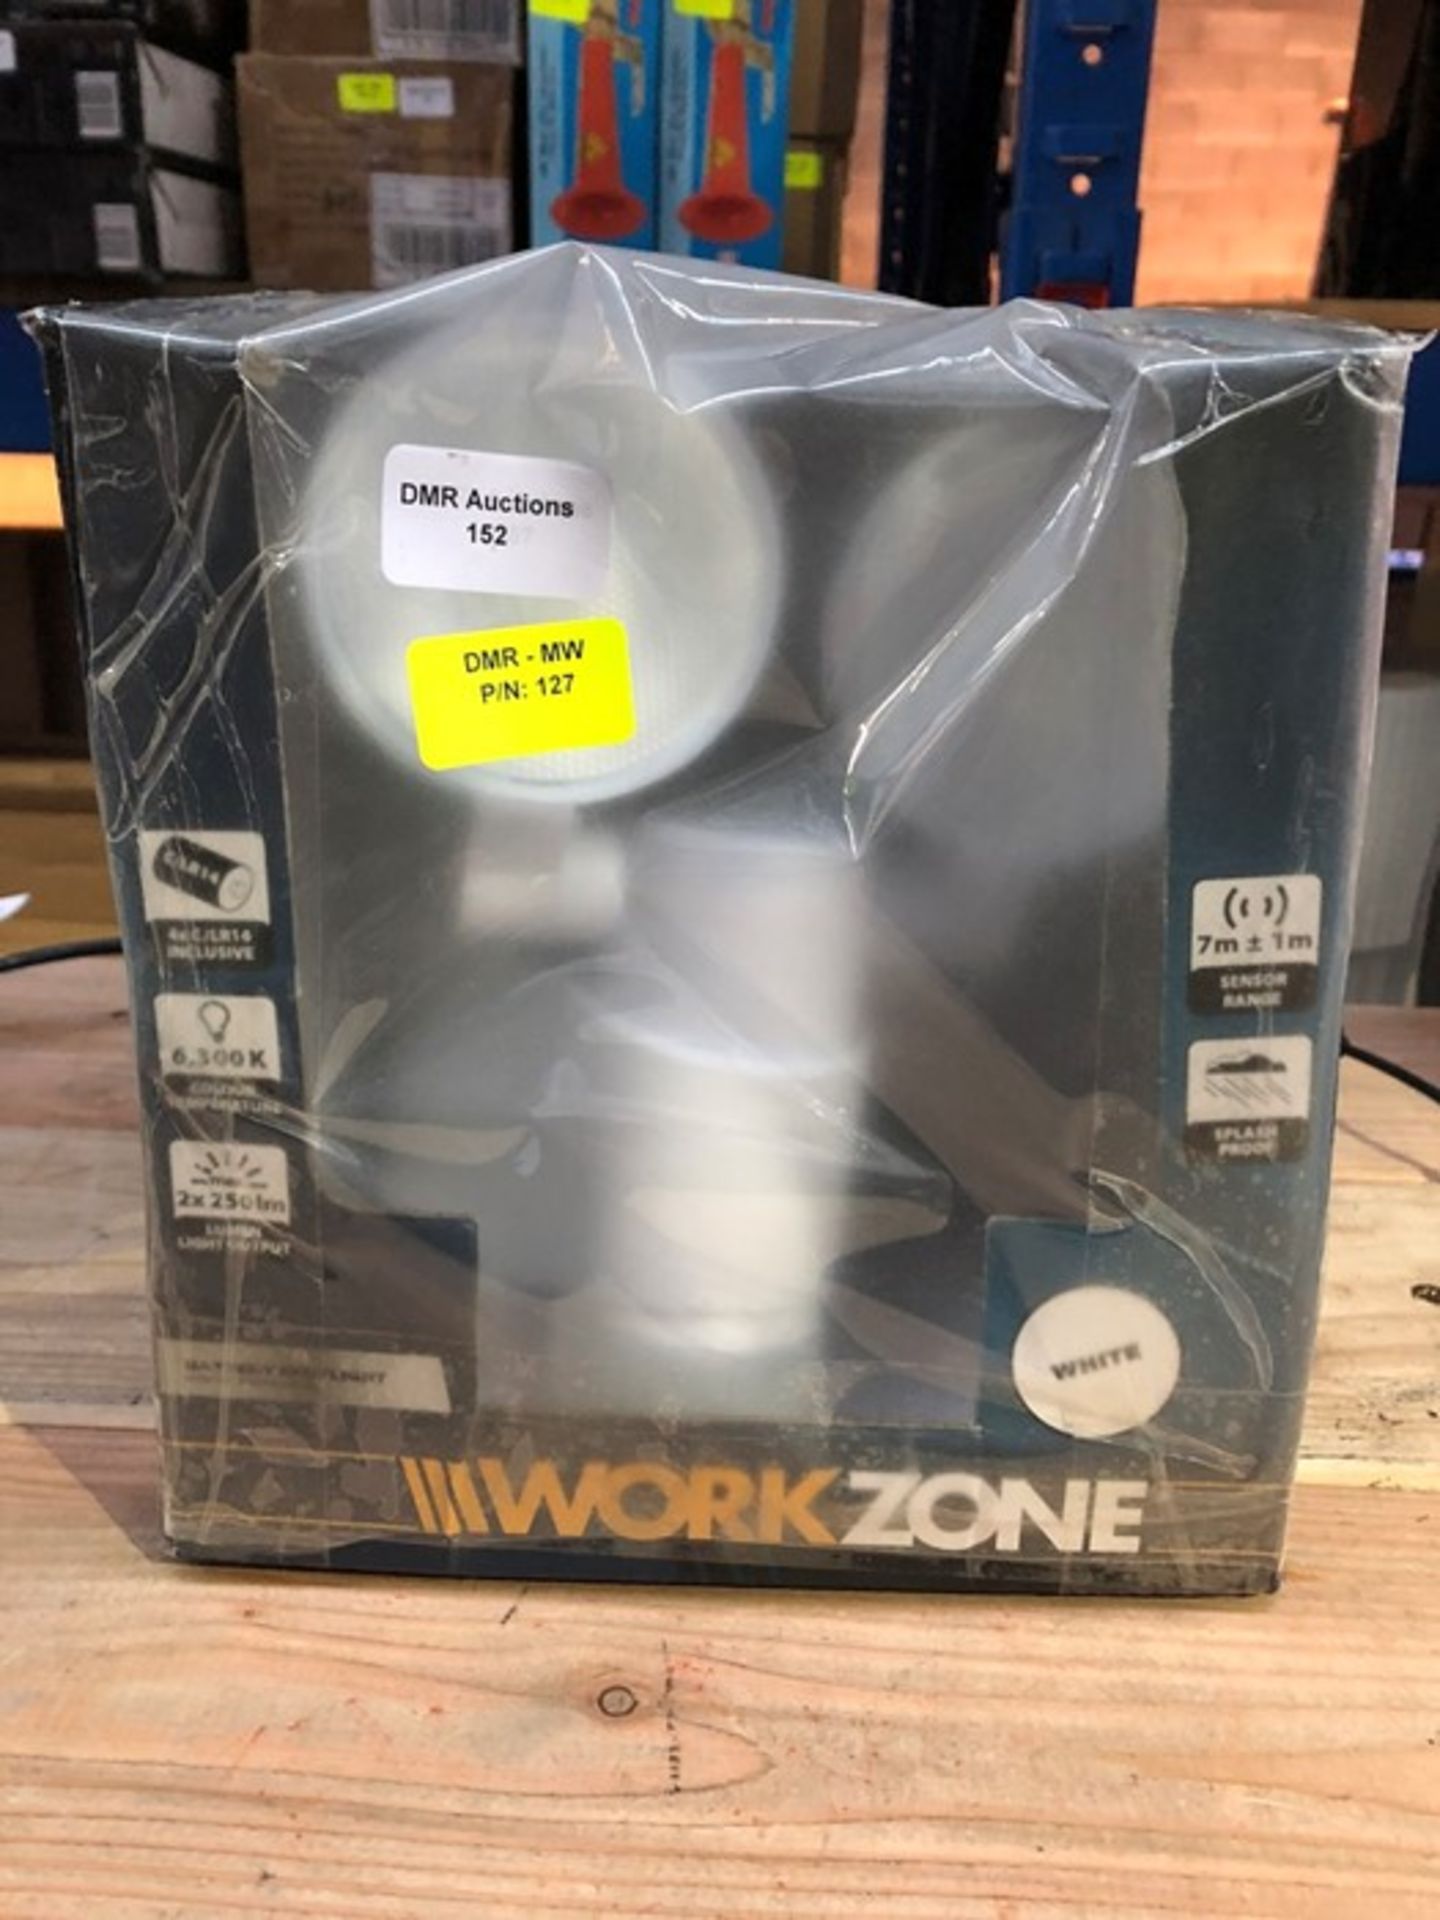 1 BOXED WORKZONE BATTERY SPOTLIGHT / RRP £34.99 (PUBLIC VIEWING AVAILABLE)